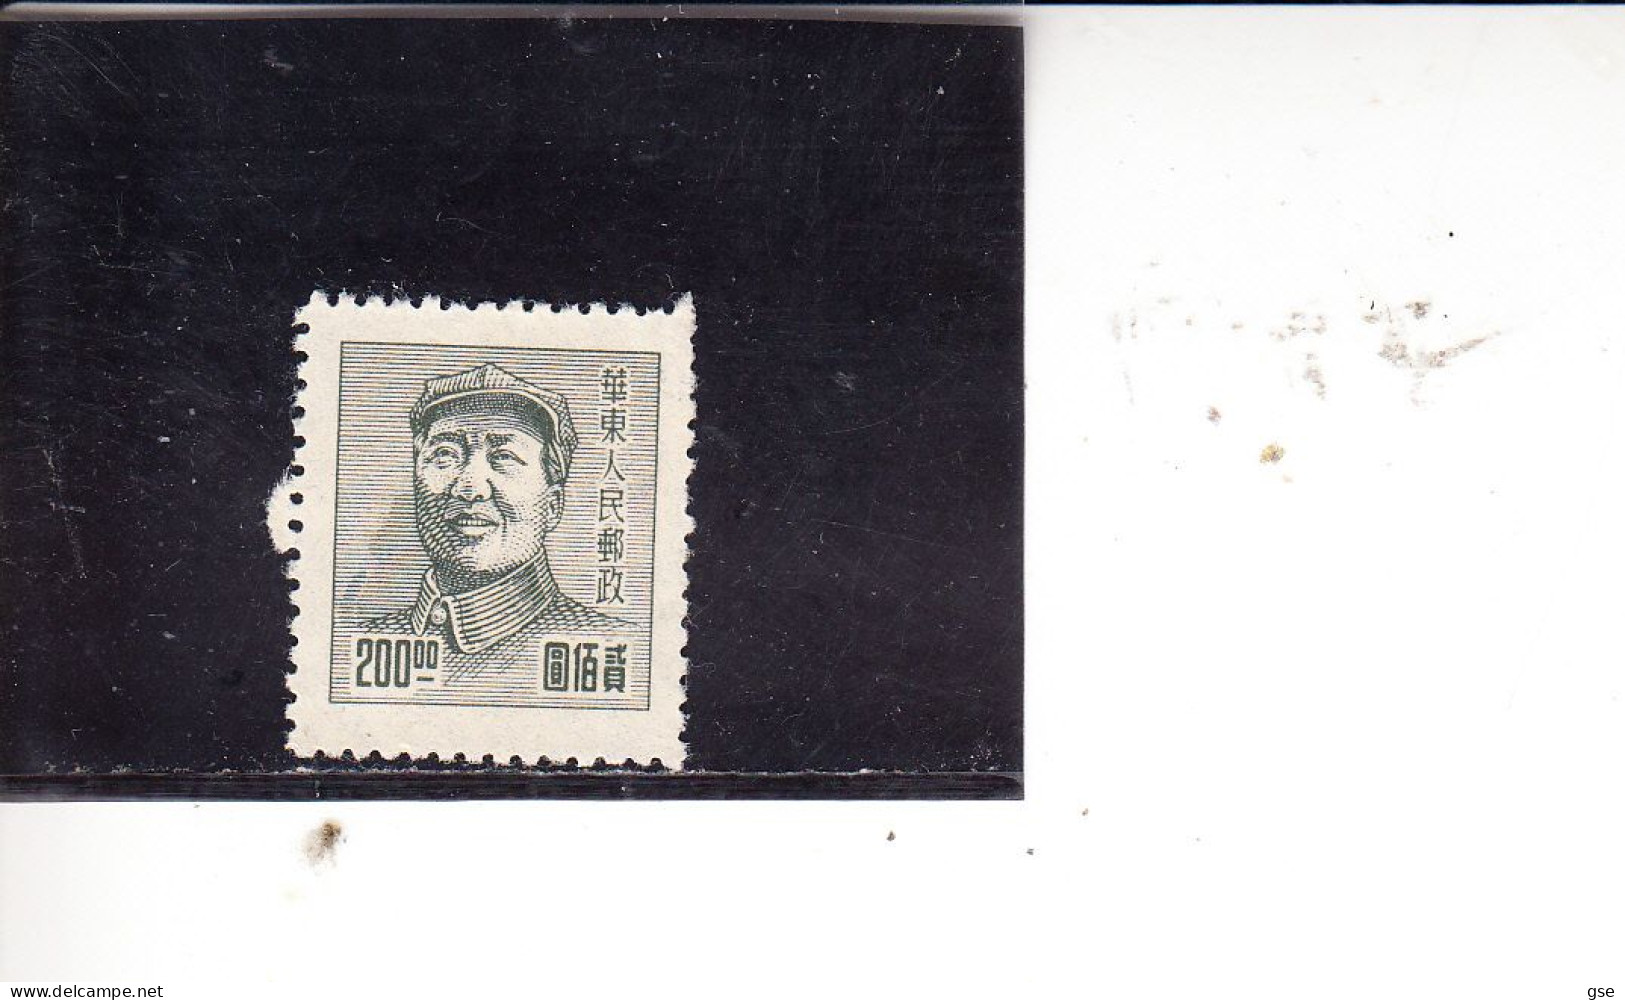 CINA  ORIENTALE  1949 - (senza Gomma) - Oost-China 1949-50